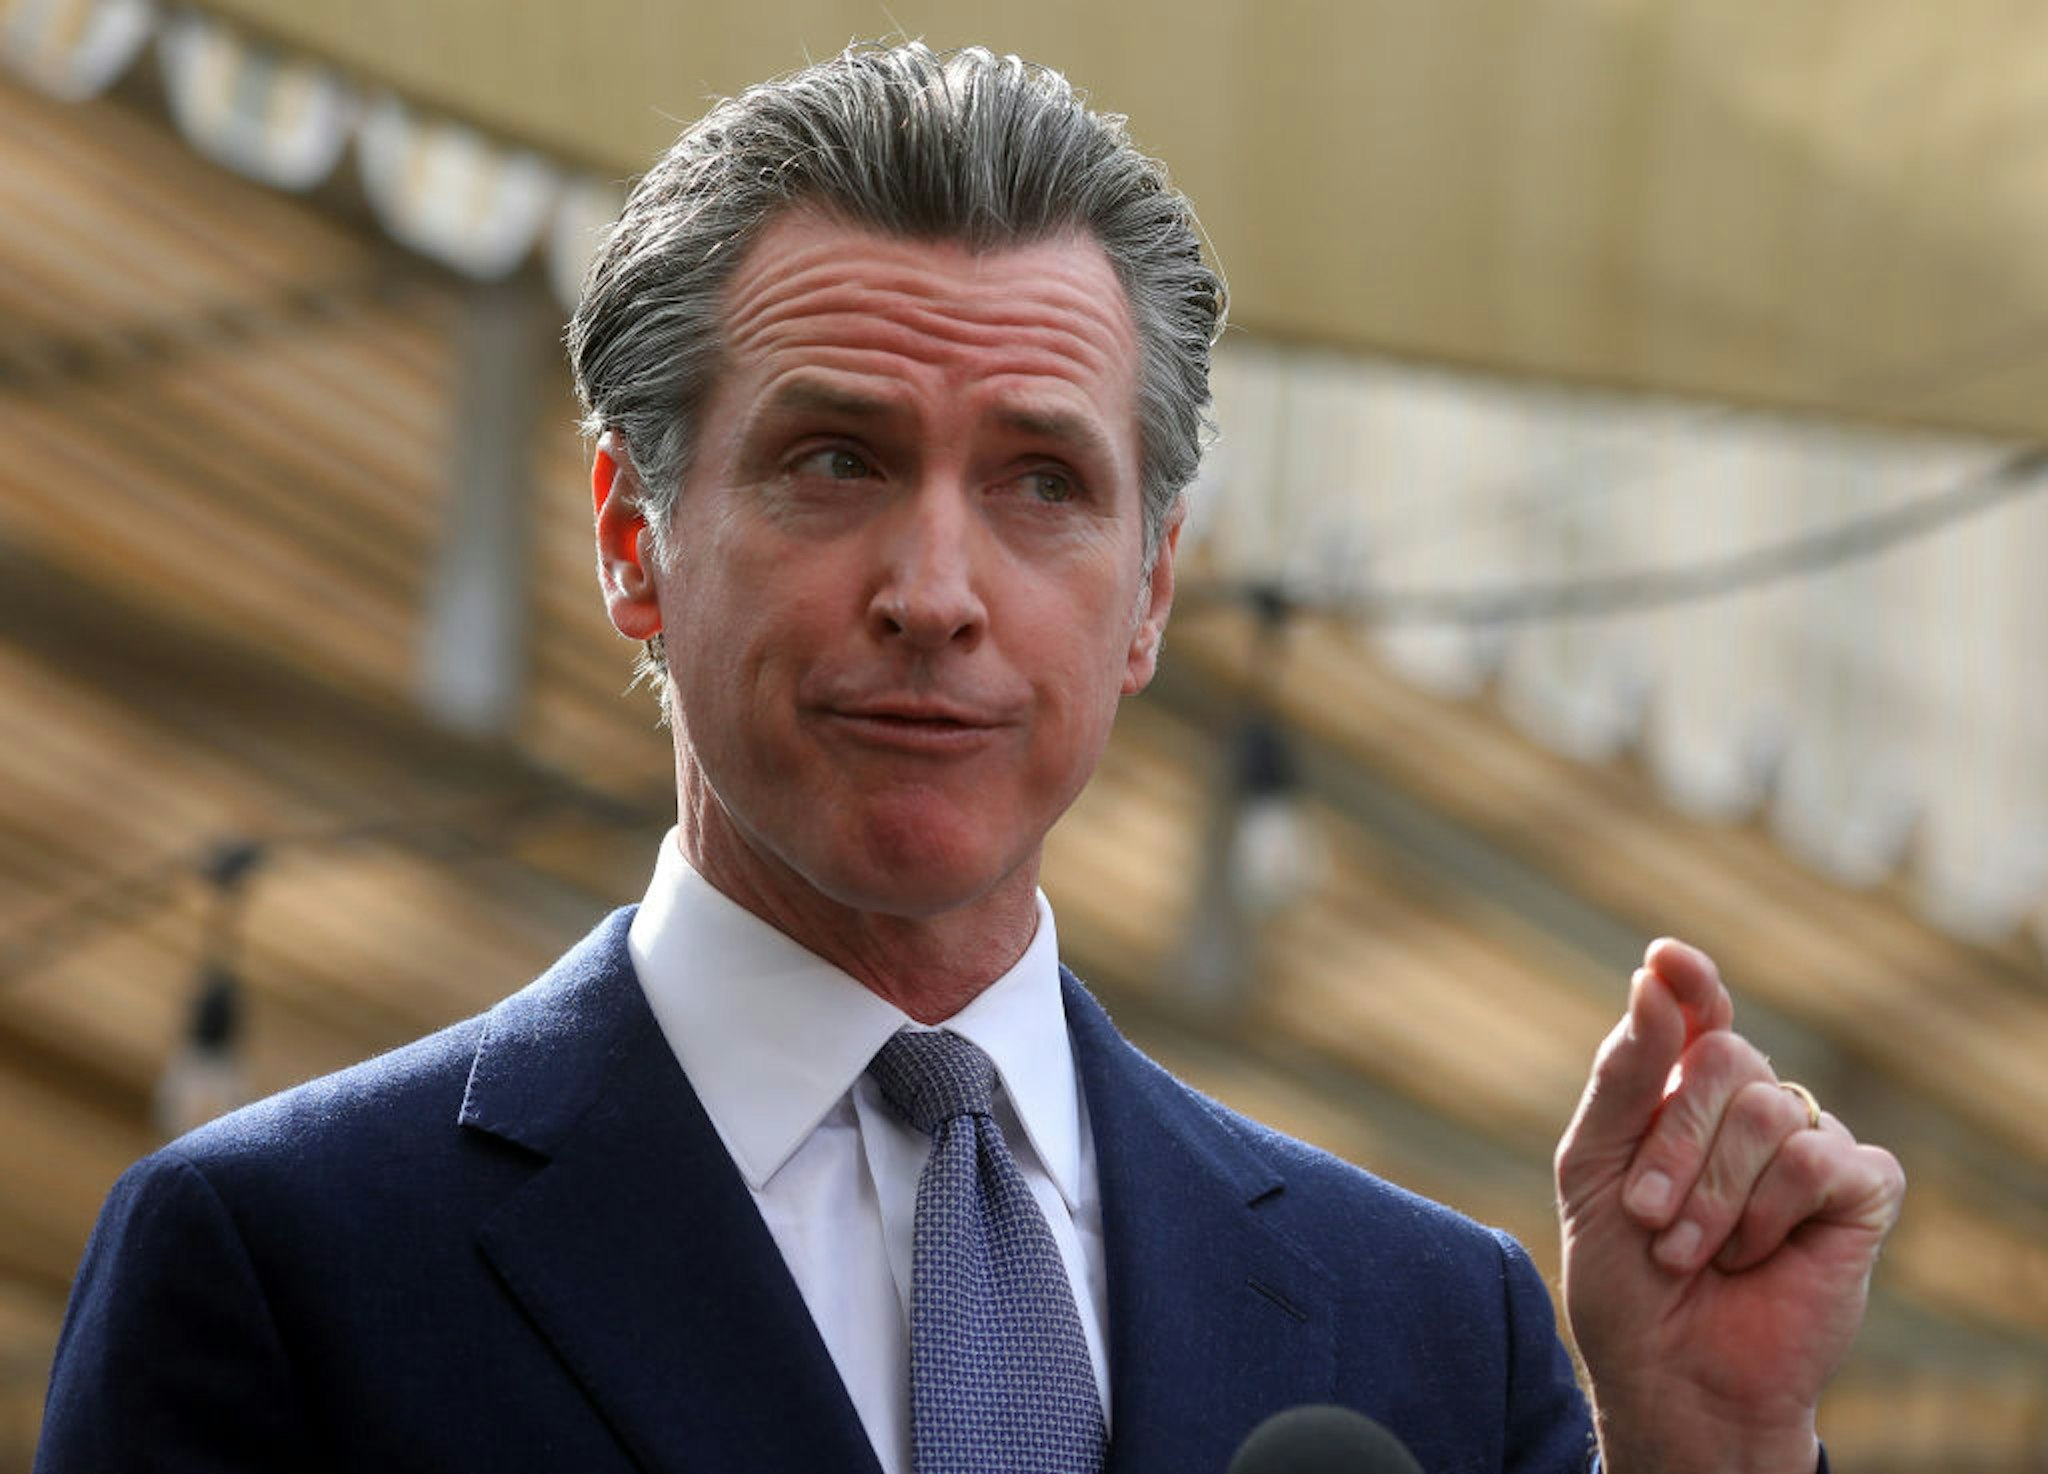 OAKLAND, CA - FEBRUARY 9: Governor Gavin Newsom speaks at a press conference on Wednesday, Feb. 9, 2022, in Oakland, Calif. Newsom signed legislation to extend COVID-19 supplemental paid sick leave for workers and bolster Californias support for small businesses. (Aric Crabb/MediaNews Group/East Bay Times via Getty Images)